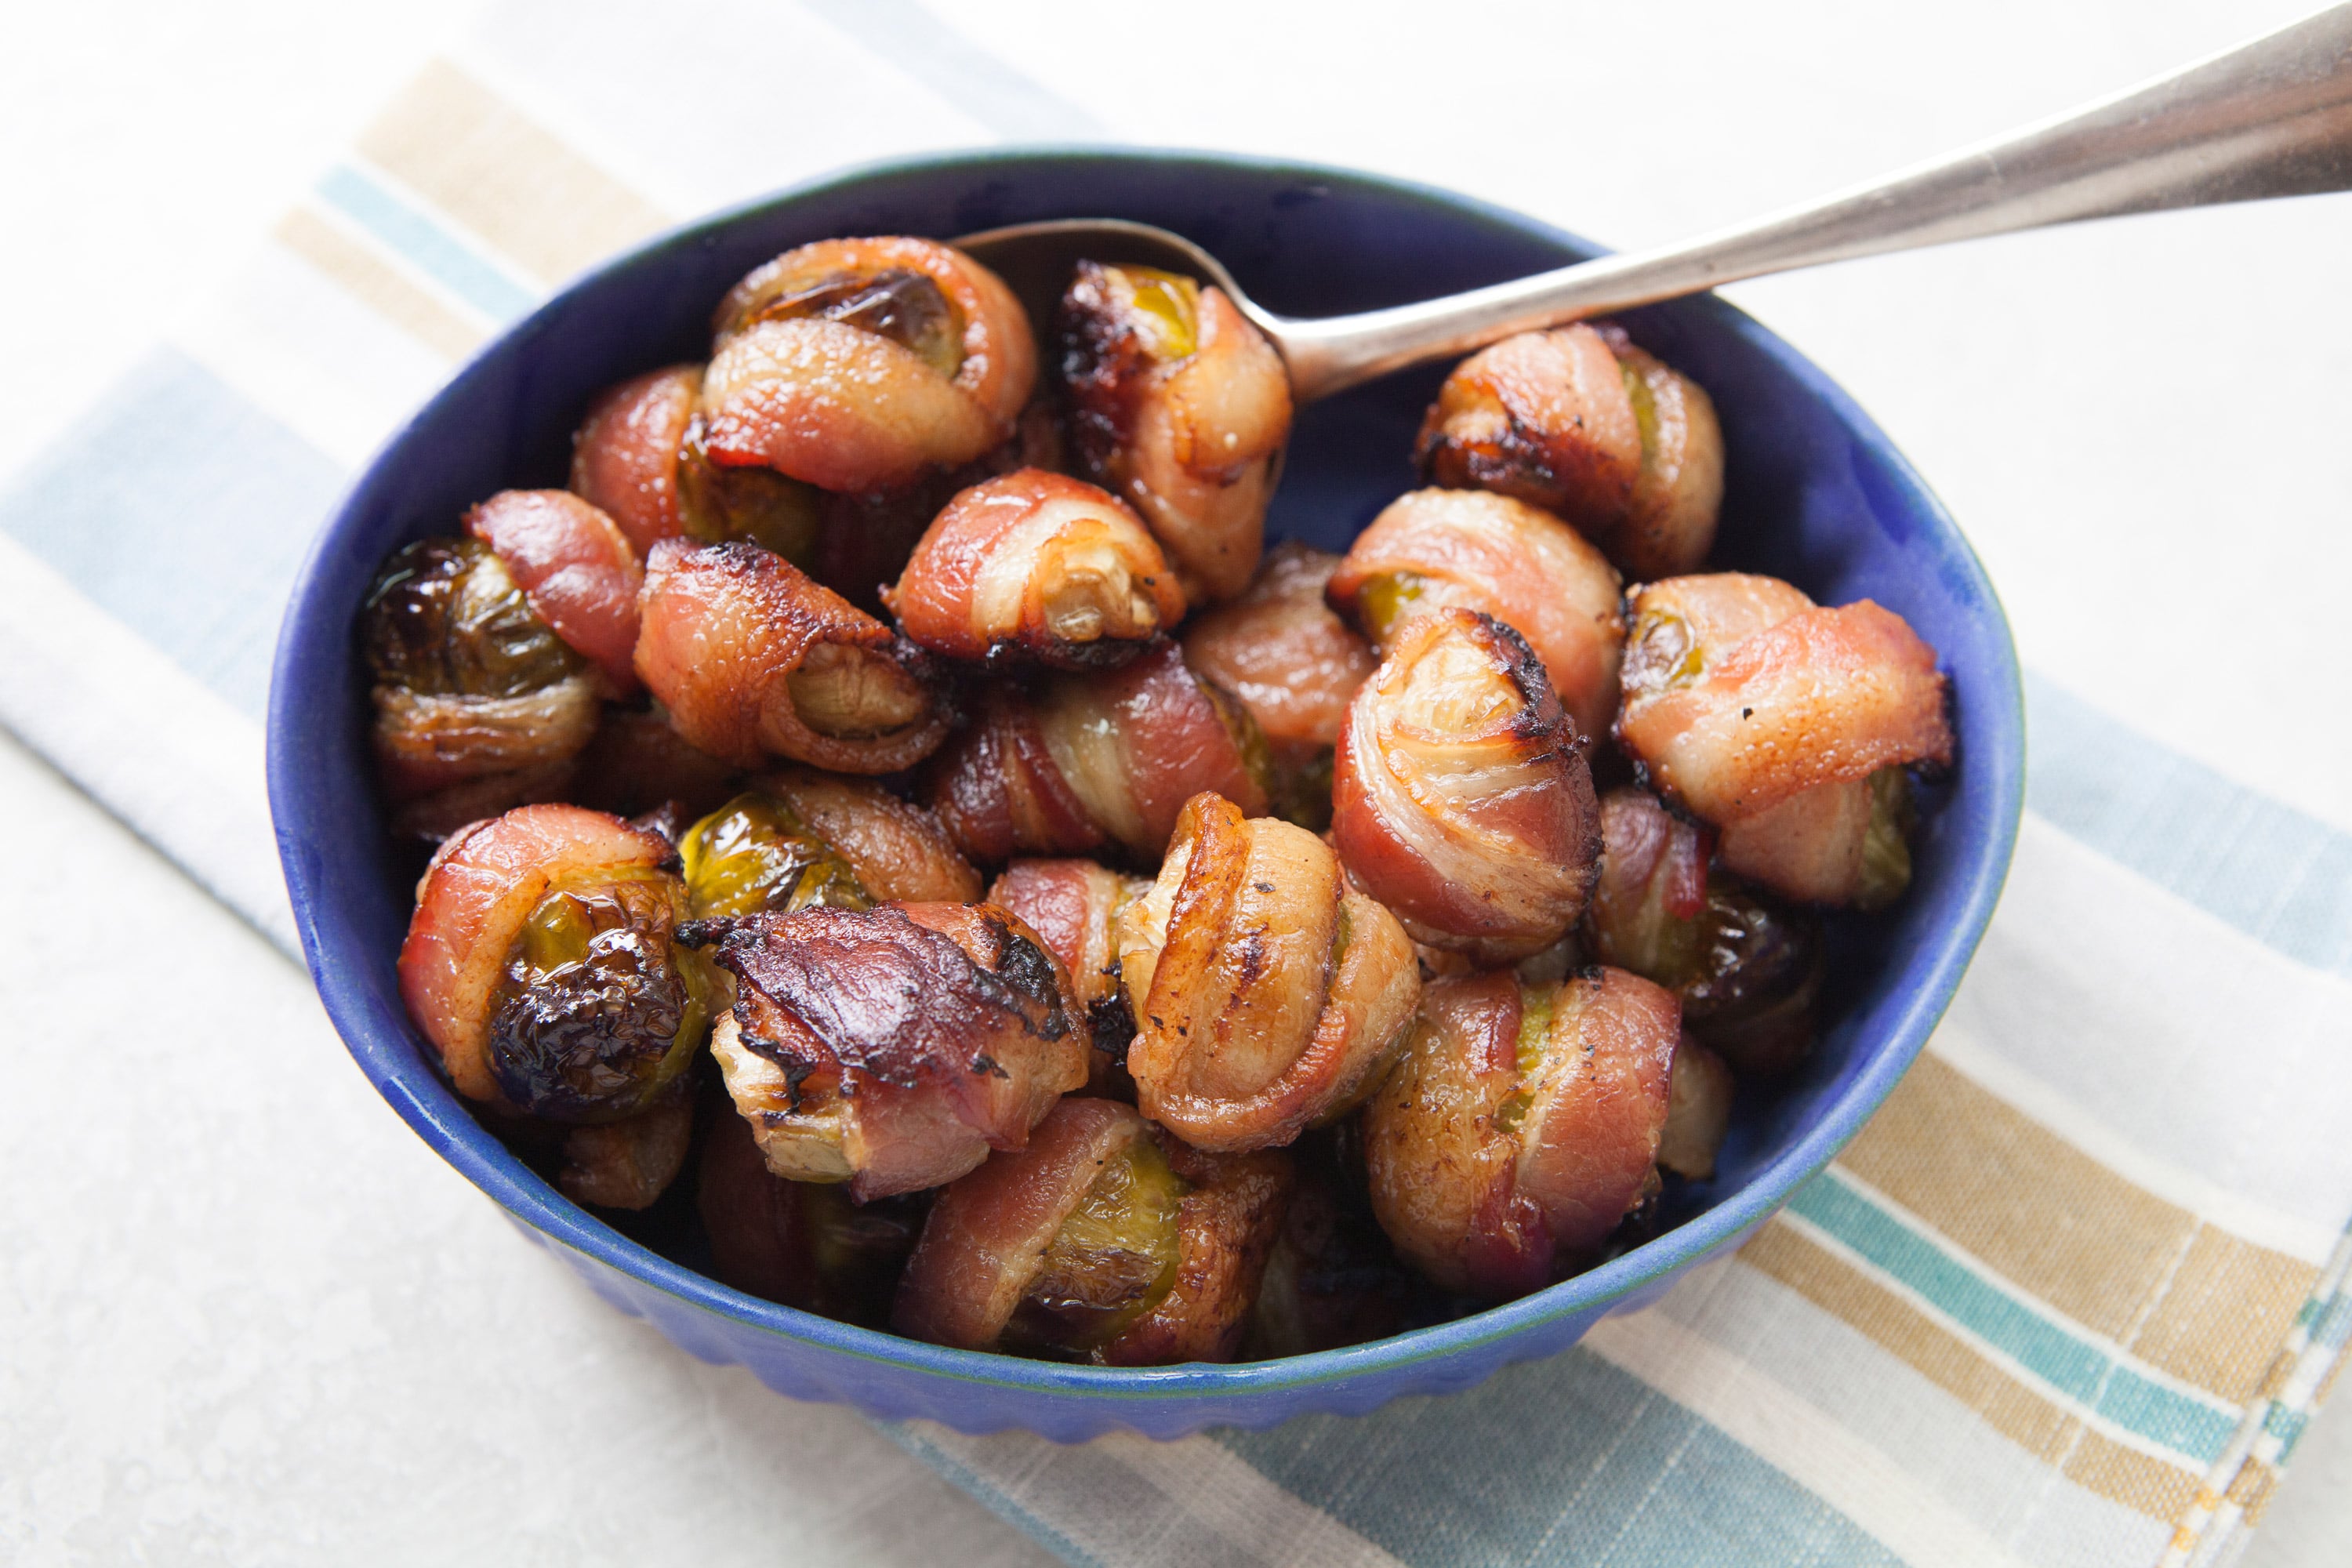 Bacon Wrapped Brussels Sprouts in blue bowl with serving spoon.